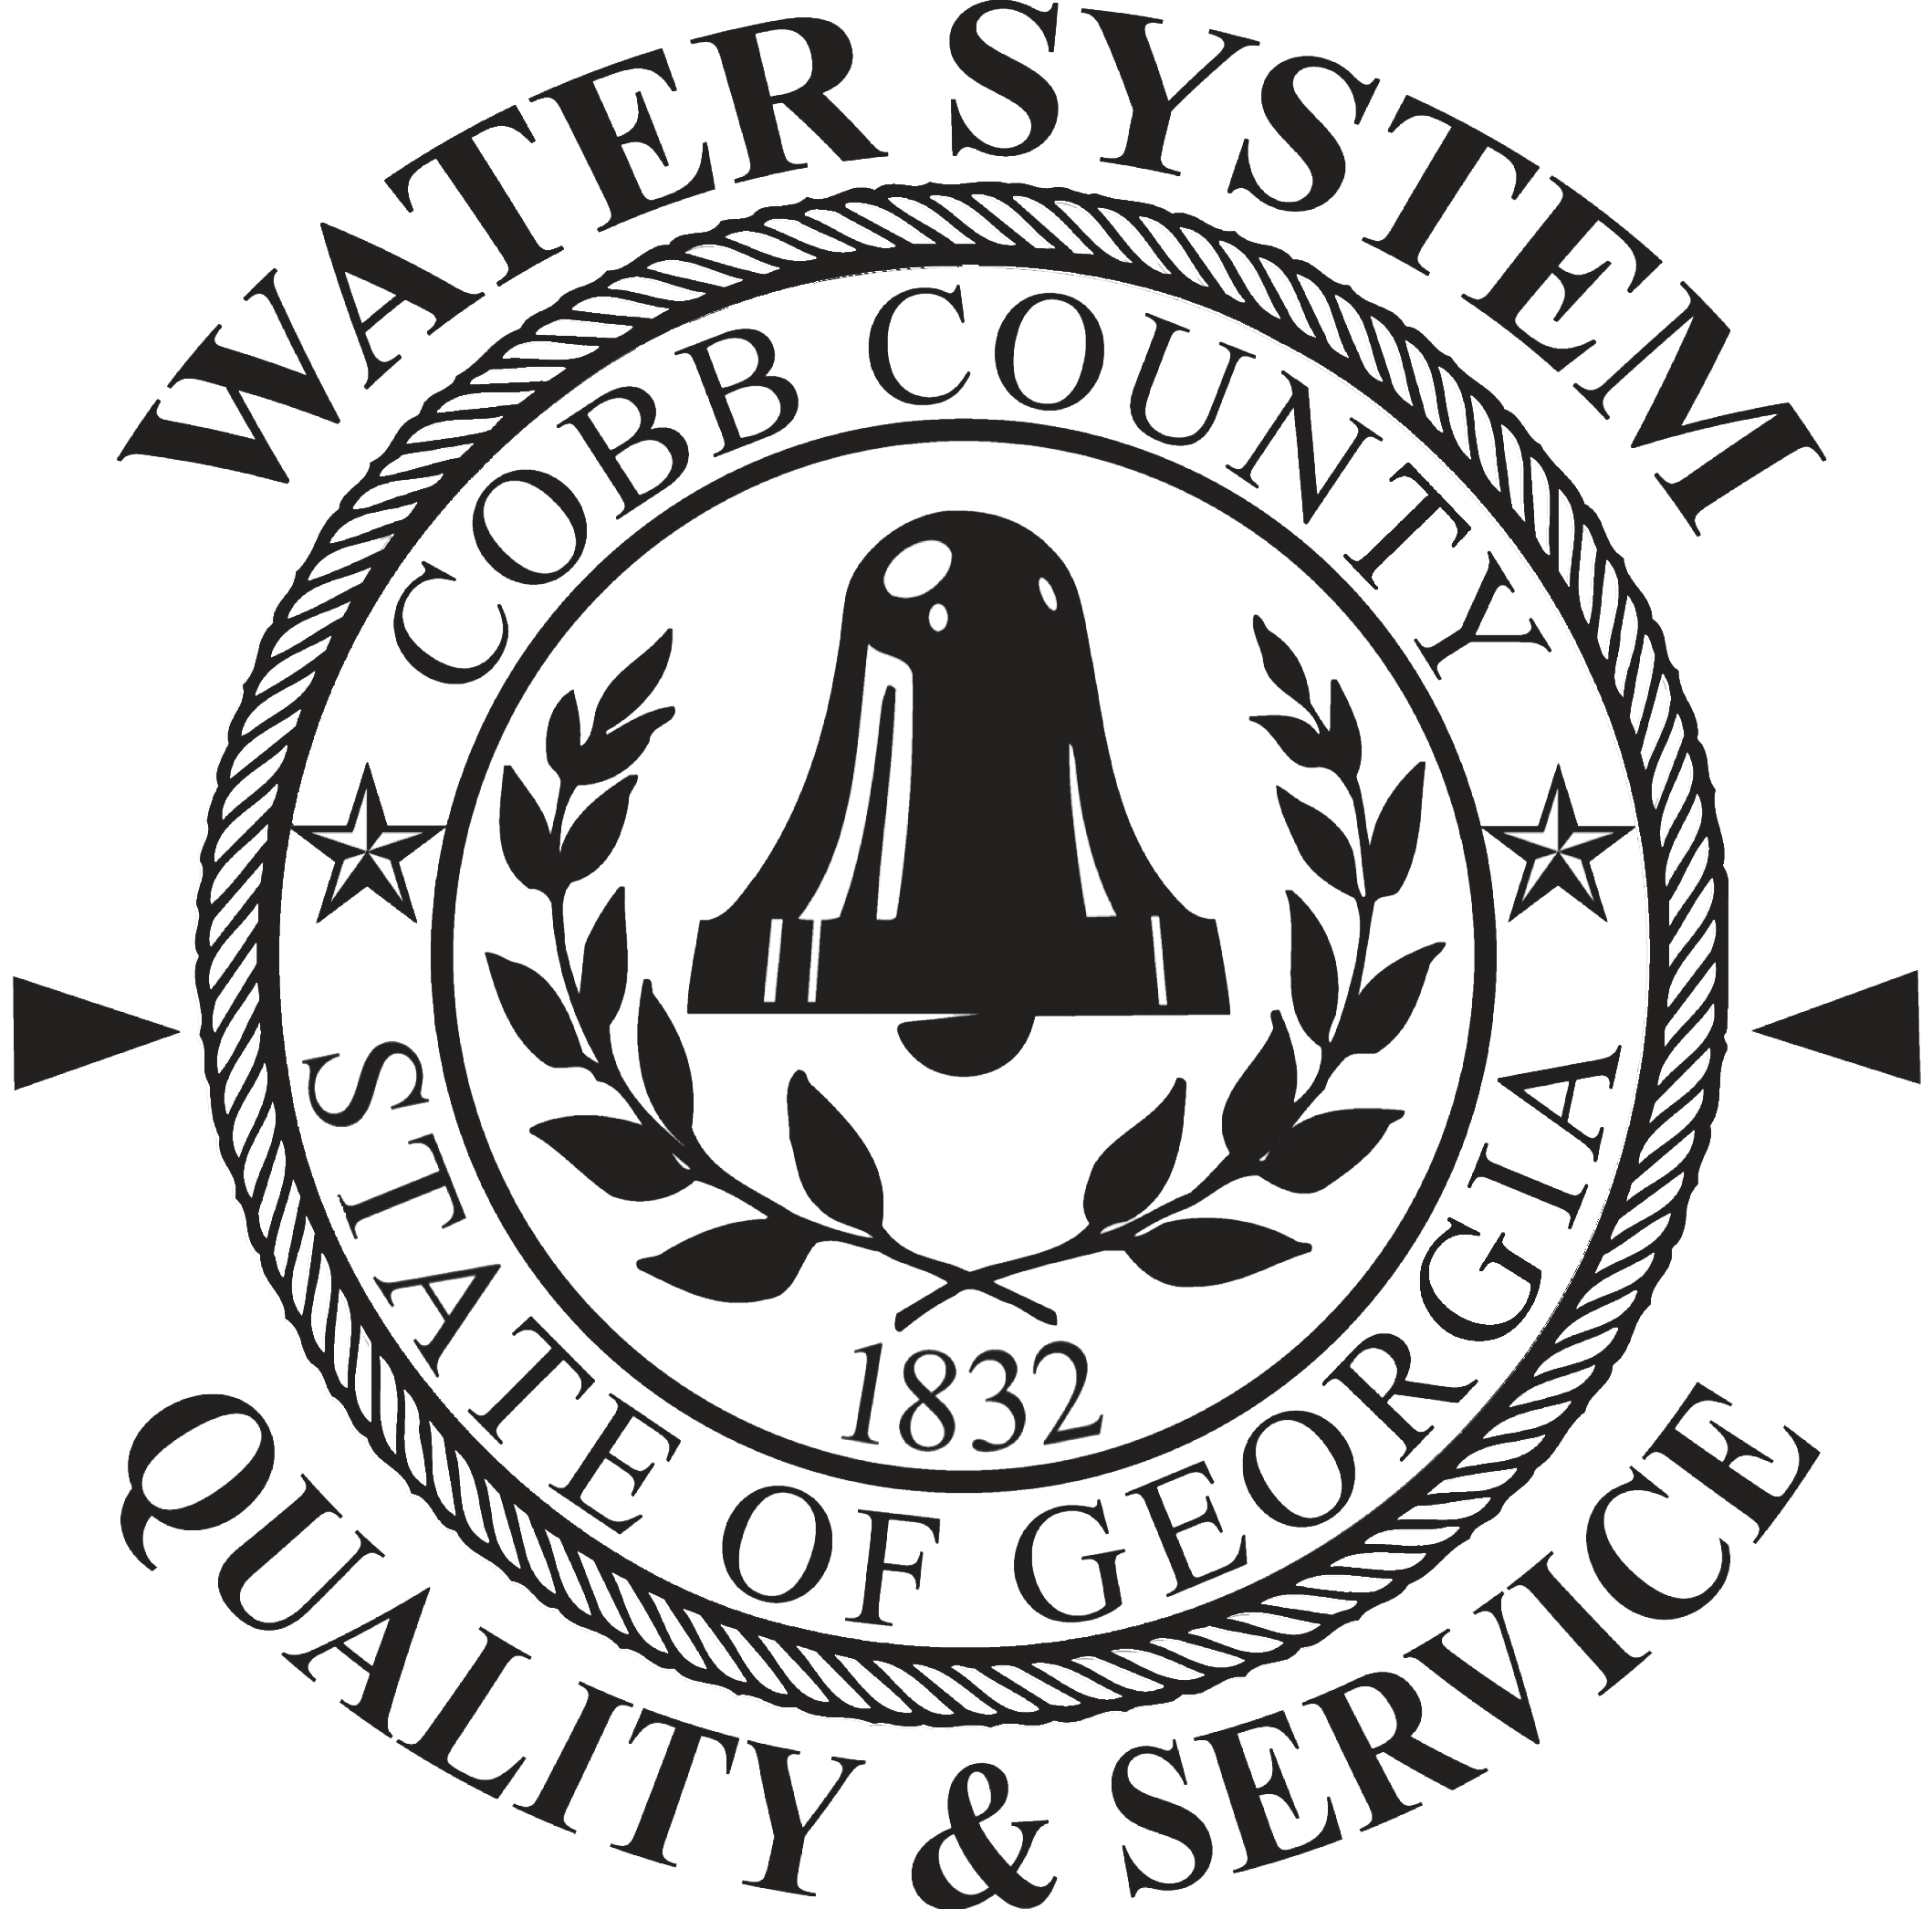 <h4>Cobb County Water System</h4>